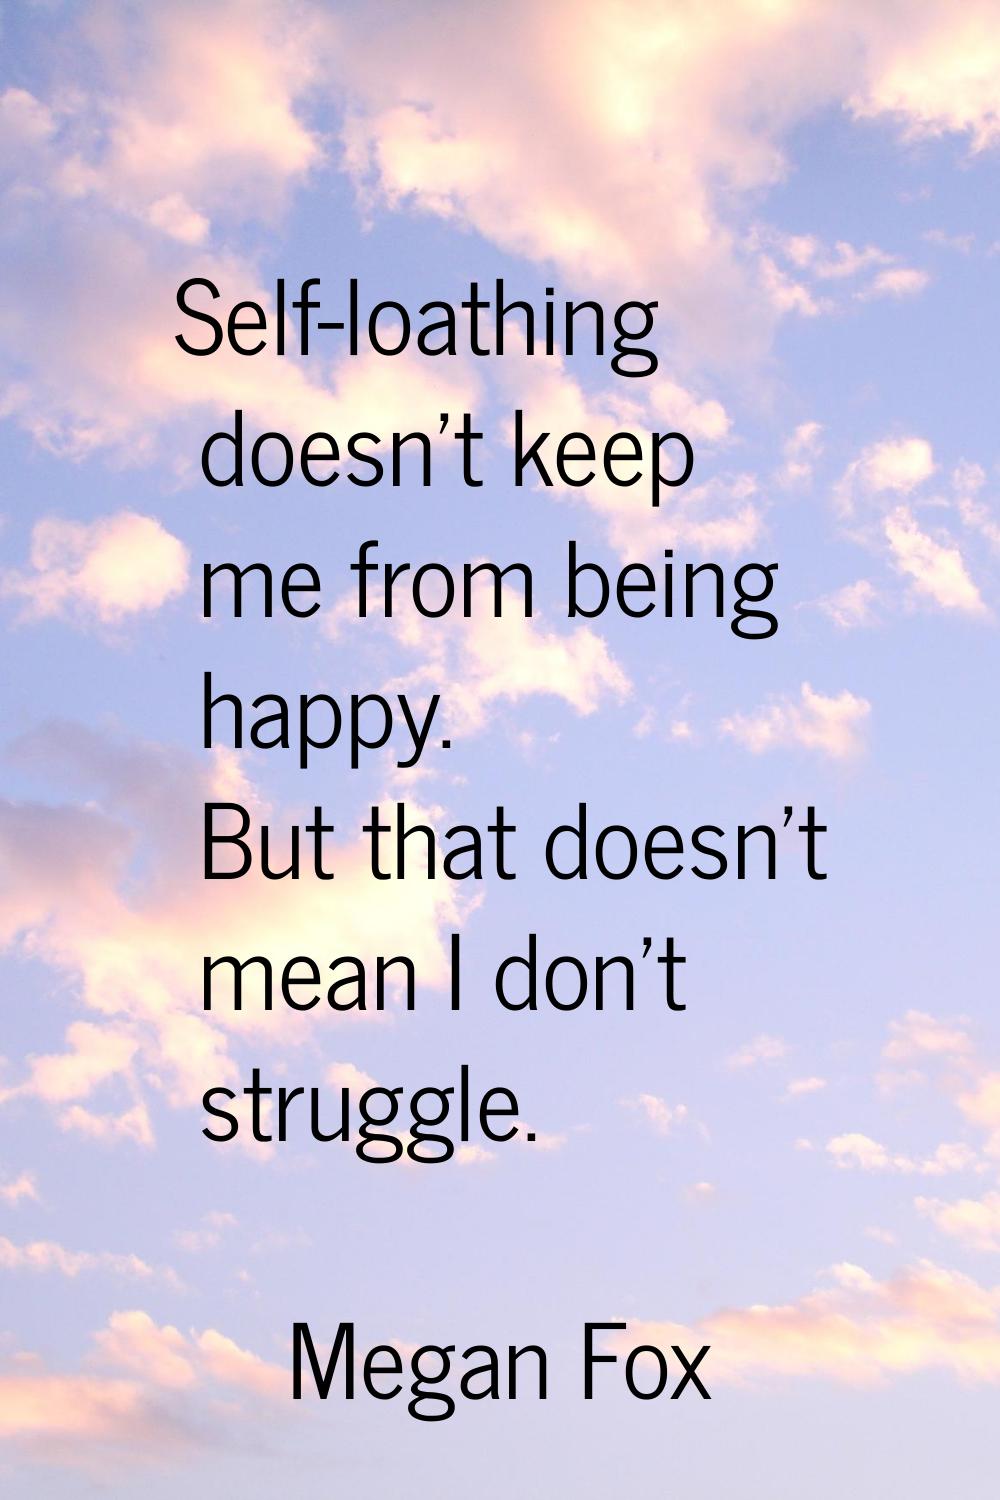 Self-loathing doesn't keep me from being happy. But that doesn't mean I don't struggle.